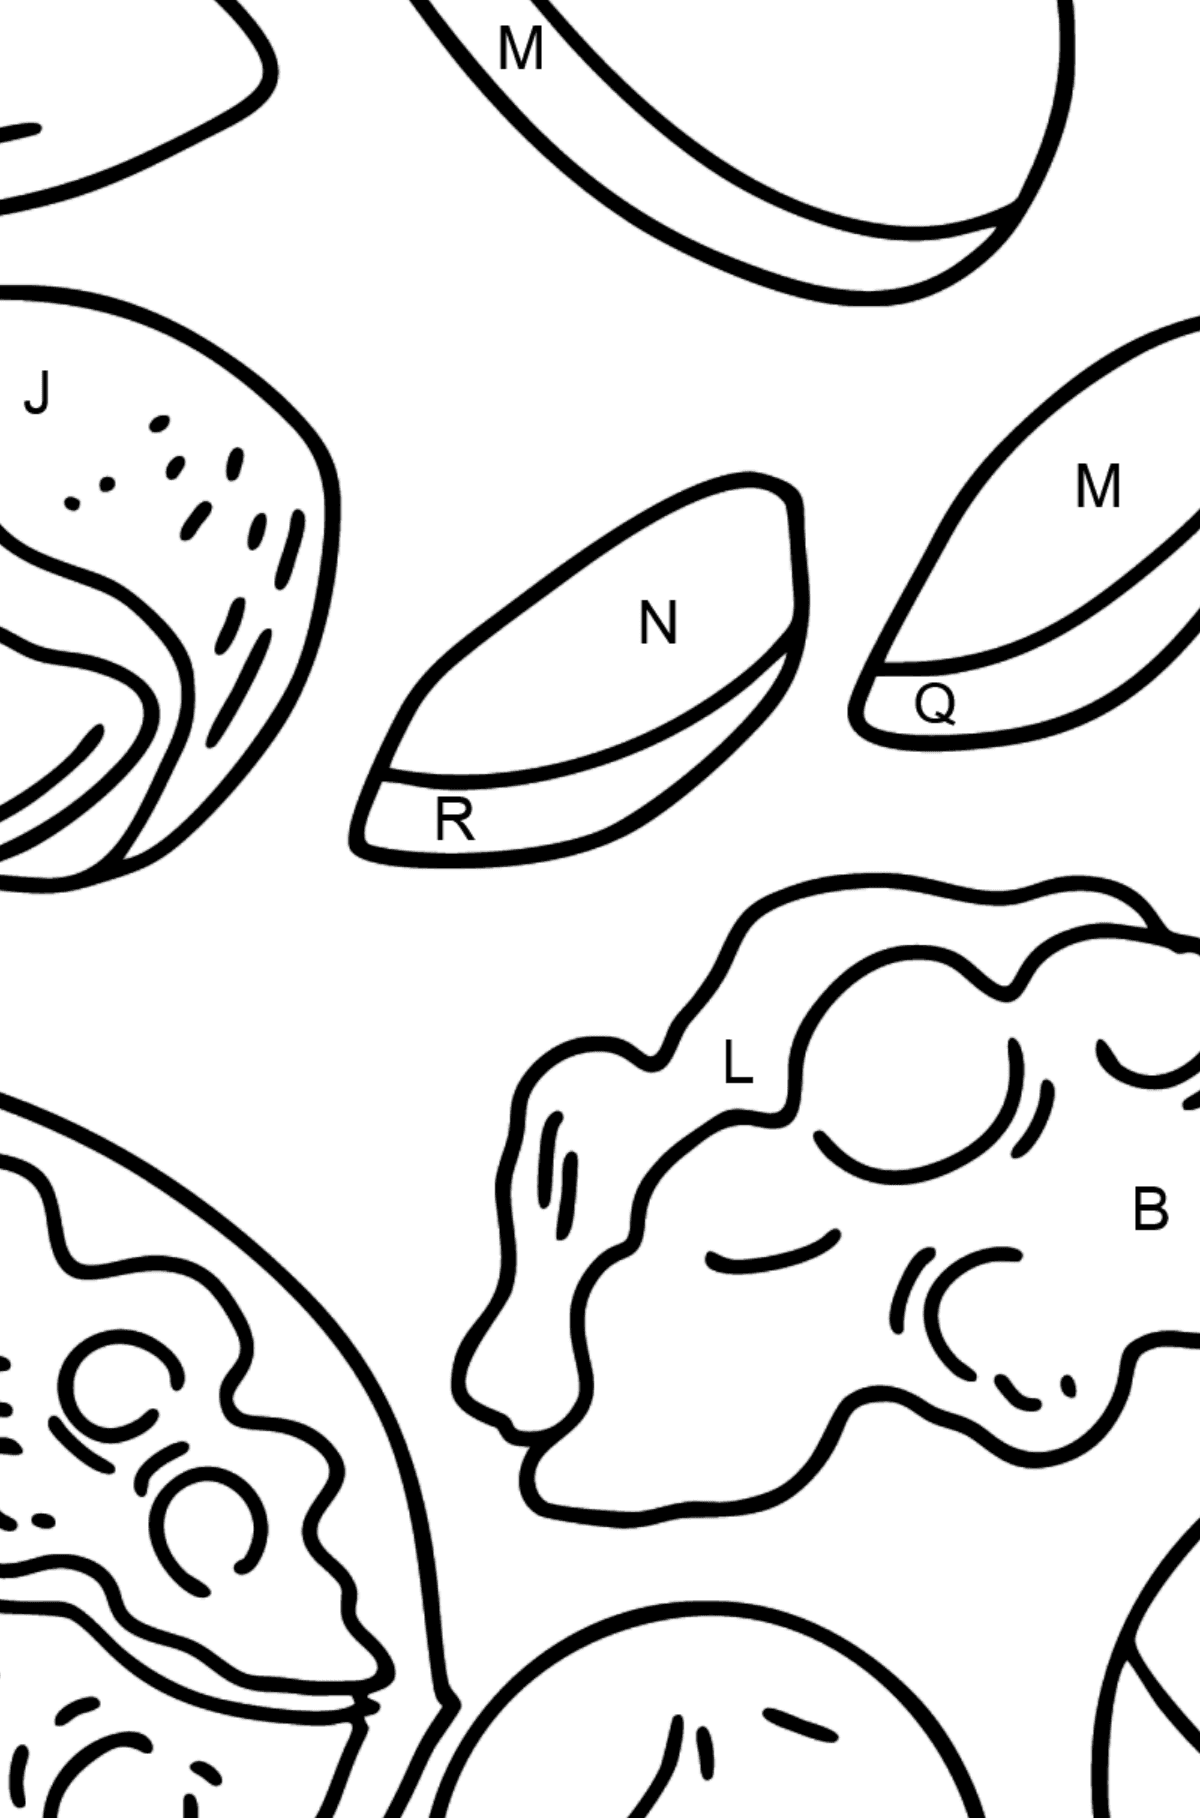 Nuts: Walnuts, Macadamia, Almonds and Peanuts coloring page - Coloring by Letters for Kids